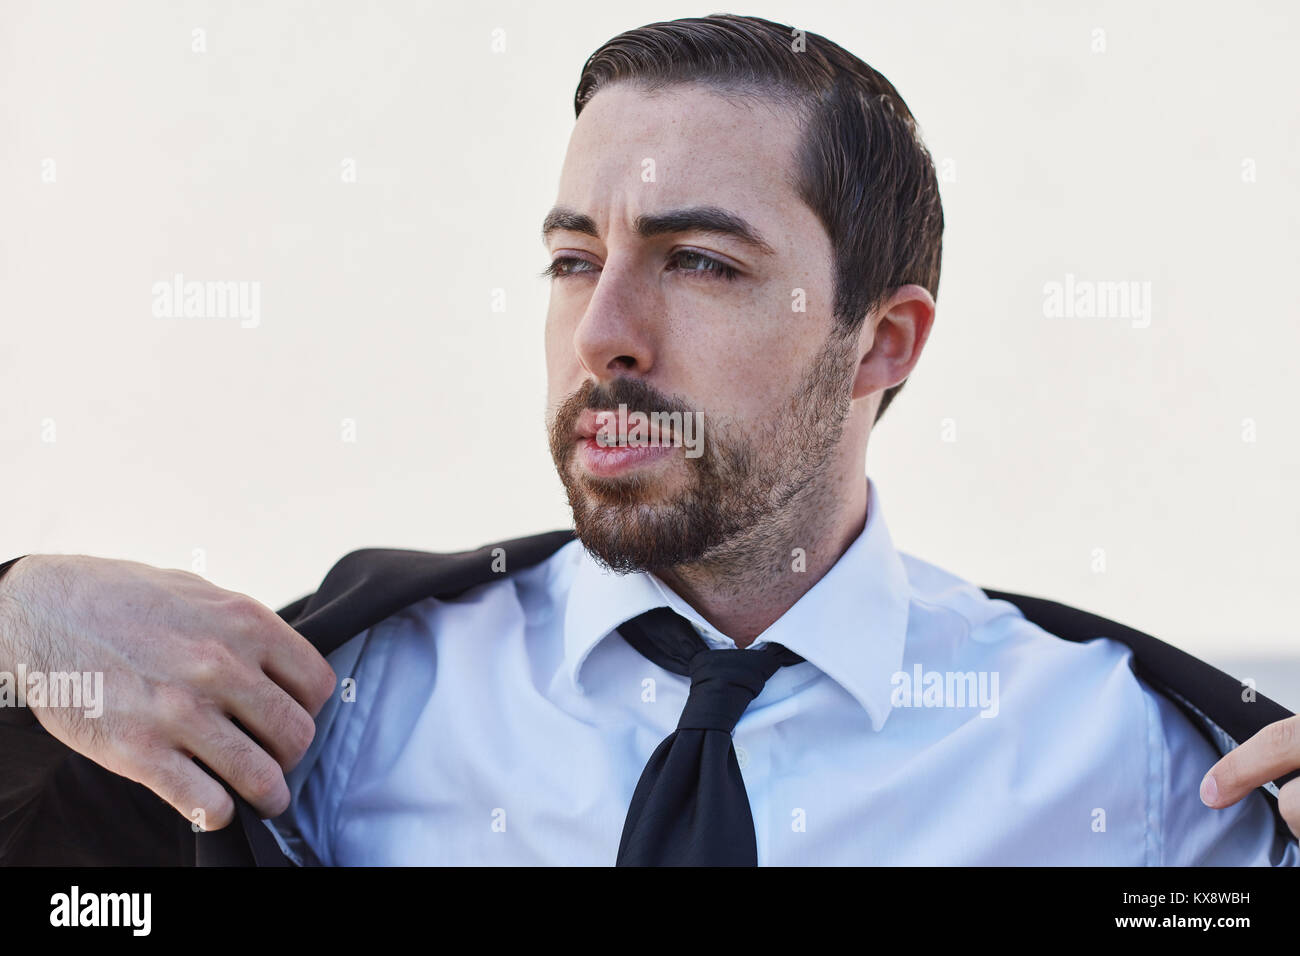 Self-assured businessman as a business founder with determination Stock Photo